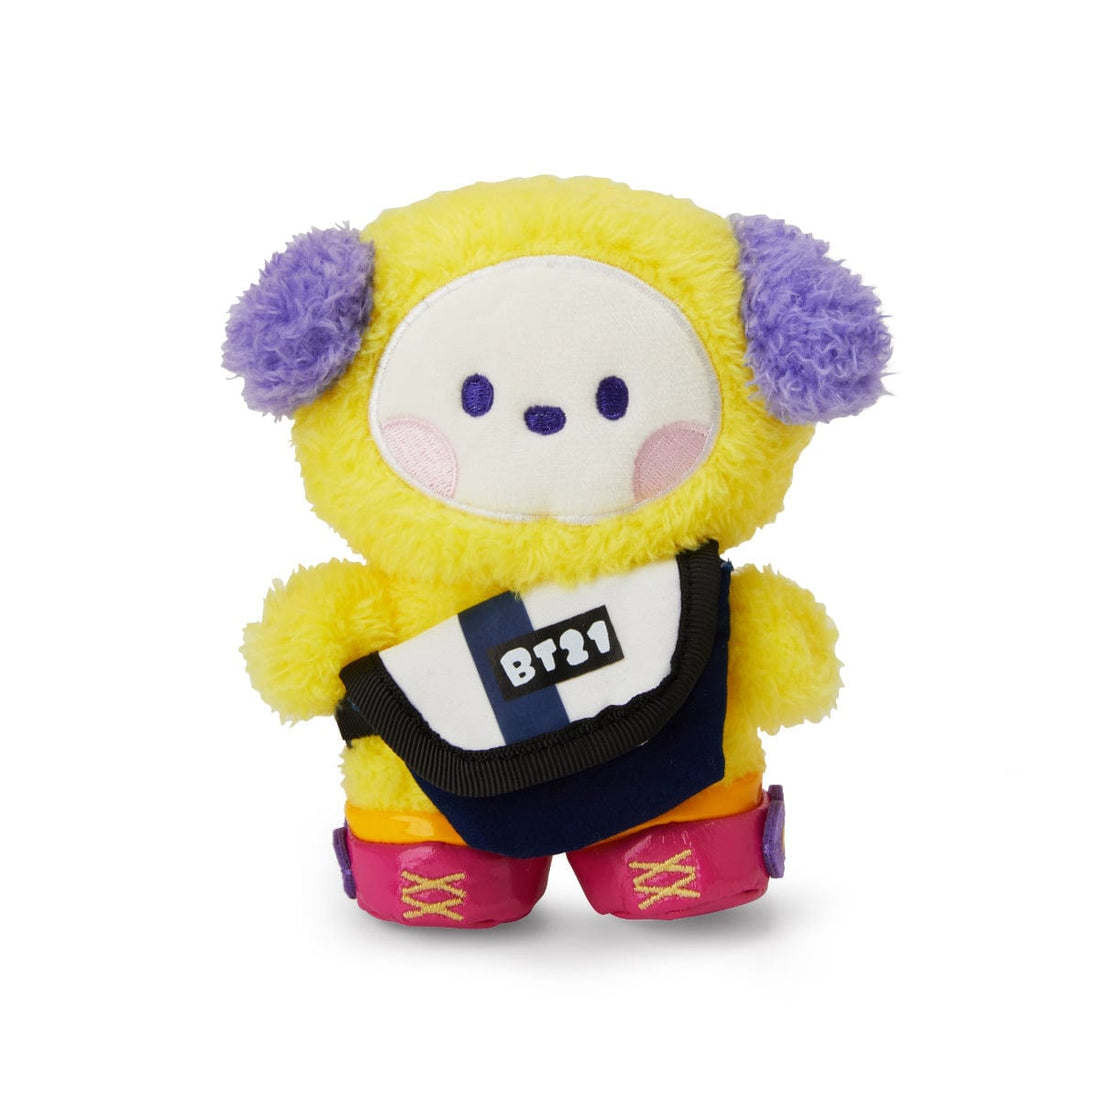 LINE FRIENDS TOYS CHIMMY BT21 CHIMMY minini STEREO STANDING DOLL